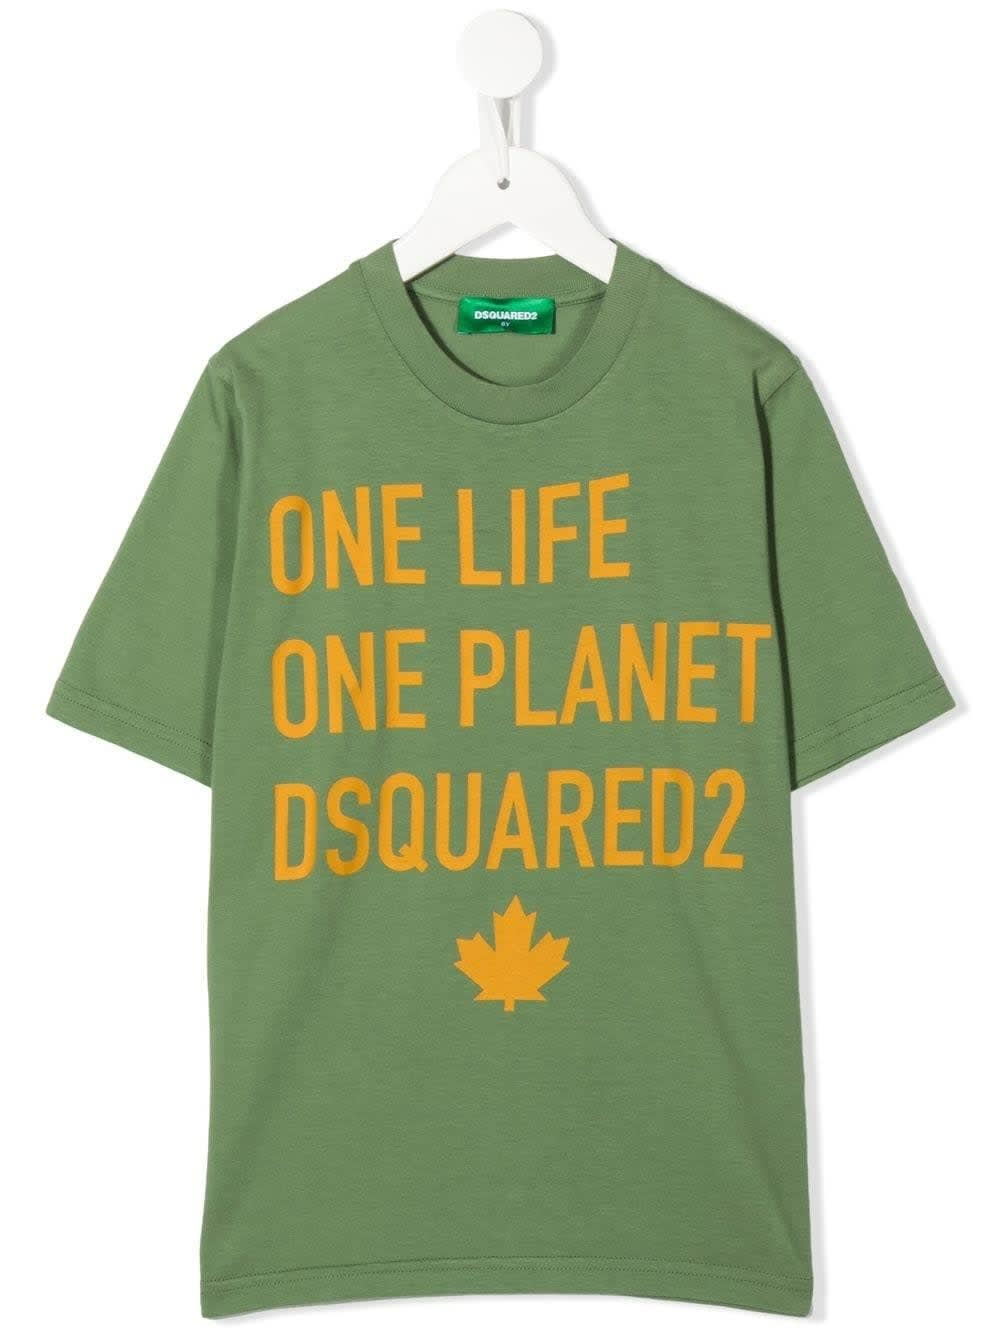 DSQUARED2 KIDS GREEN ONE LIFE ONE PLANET DSQUARED2 T-SHIRT